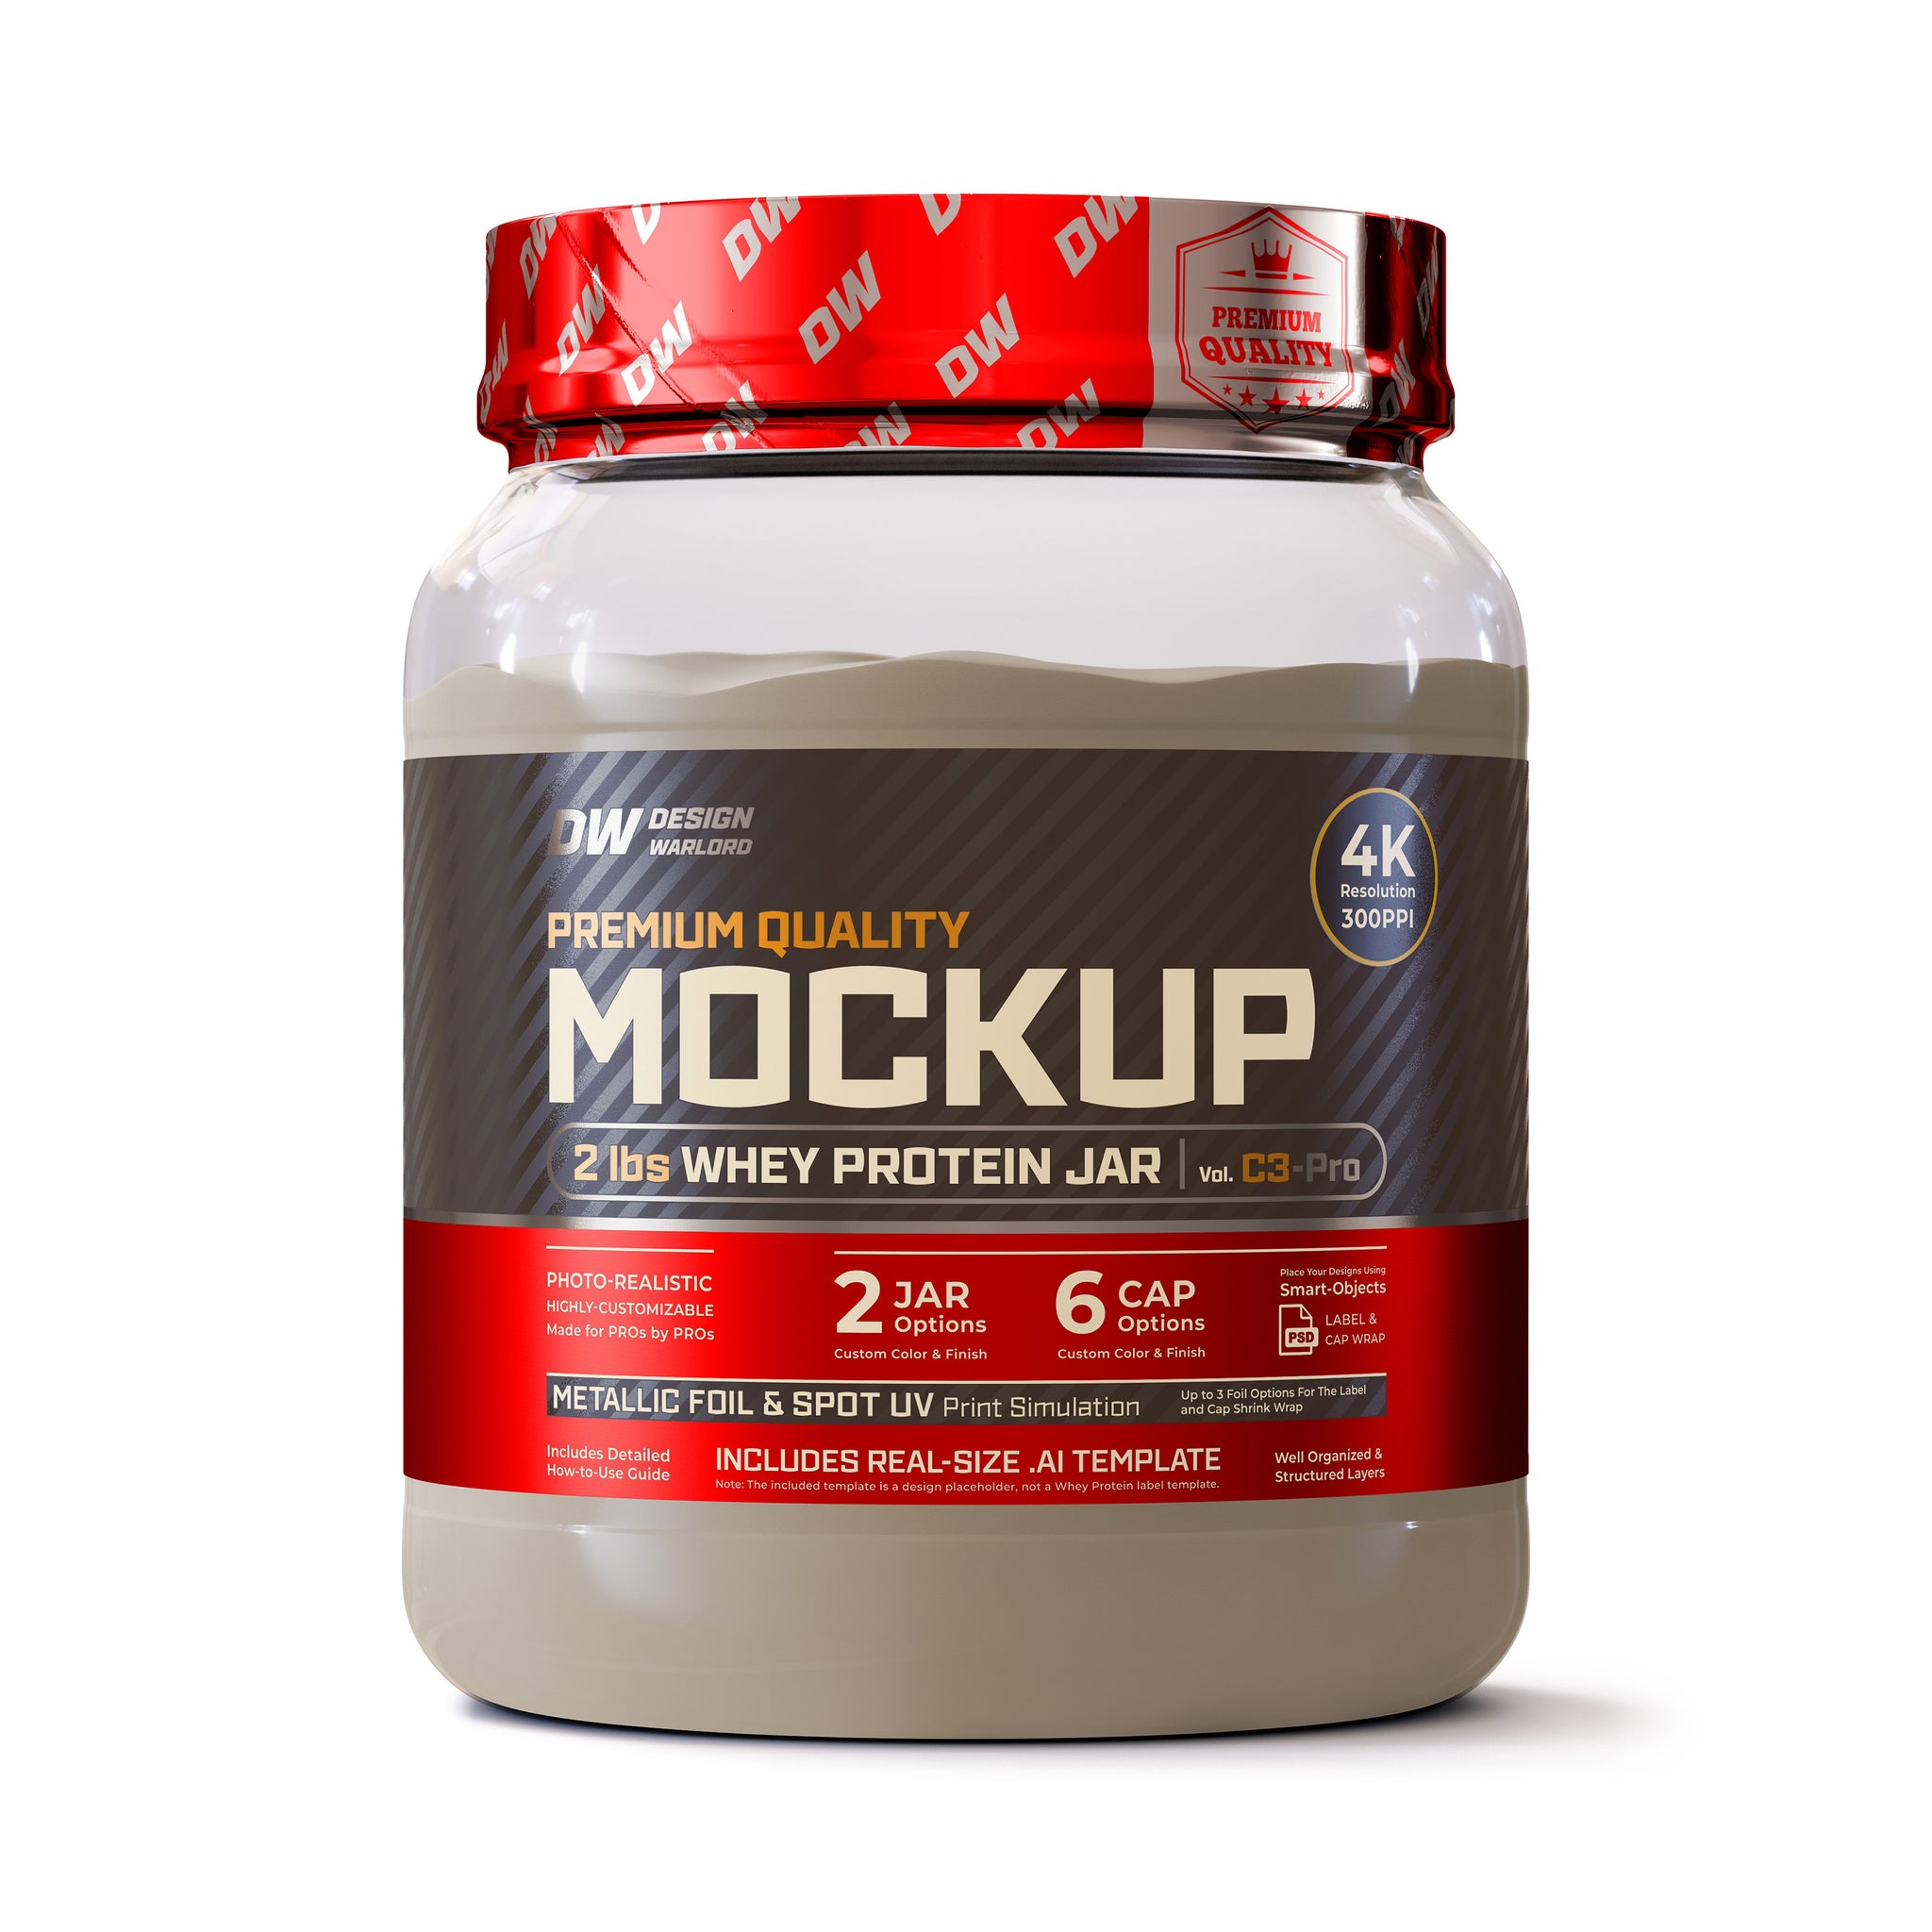 Design Warlord - 2 lbs Whey Protein Jar Mockup Vol. C3-Pro - Next-Gen Packaging PSD Mockup for product images - Transparent Clear PET plastic jar